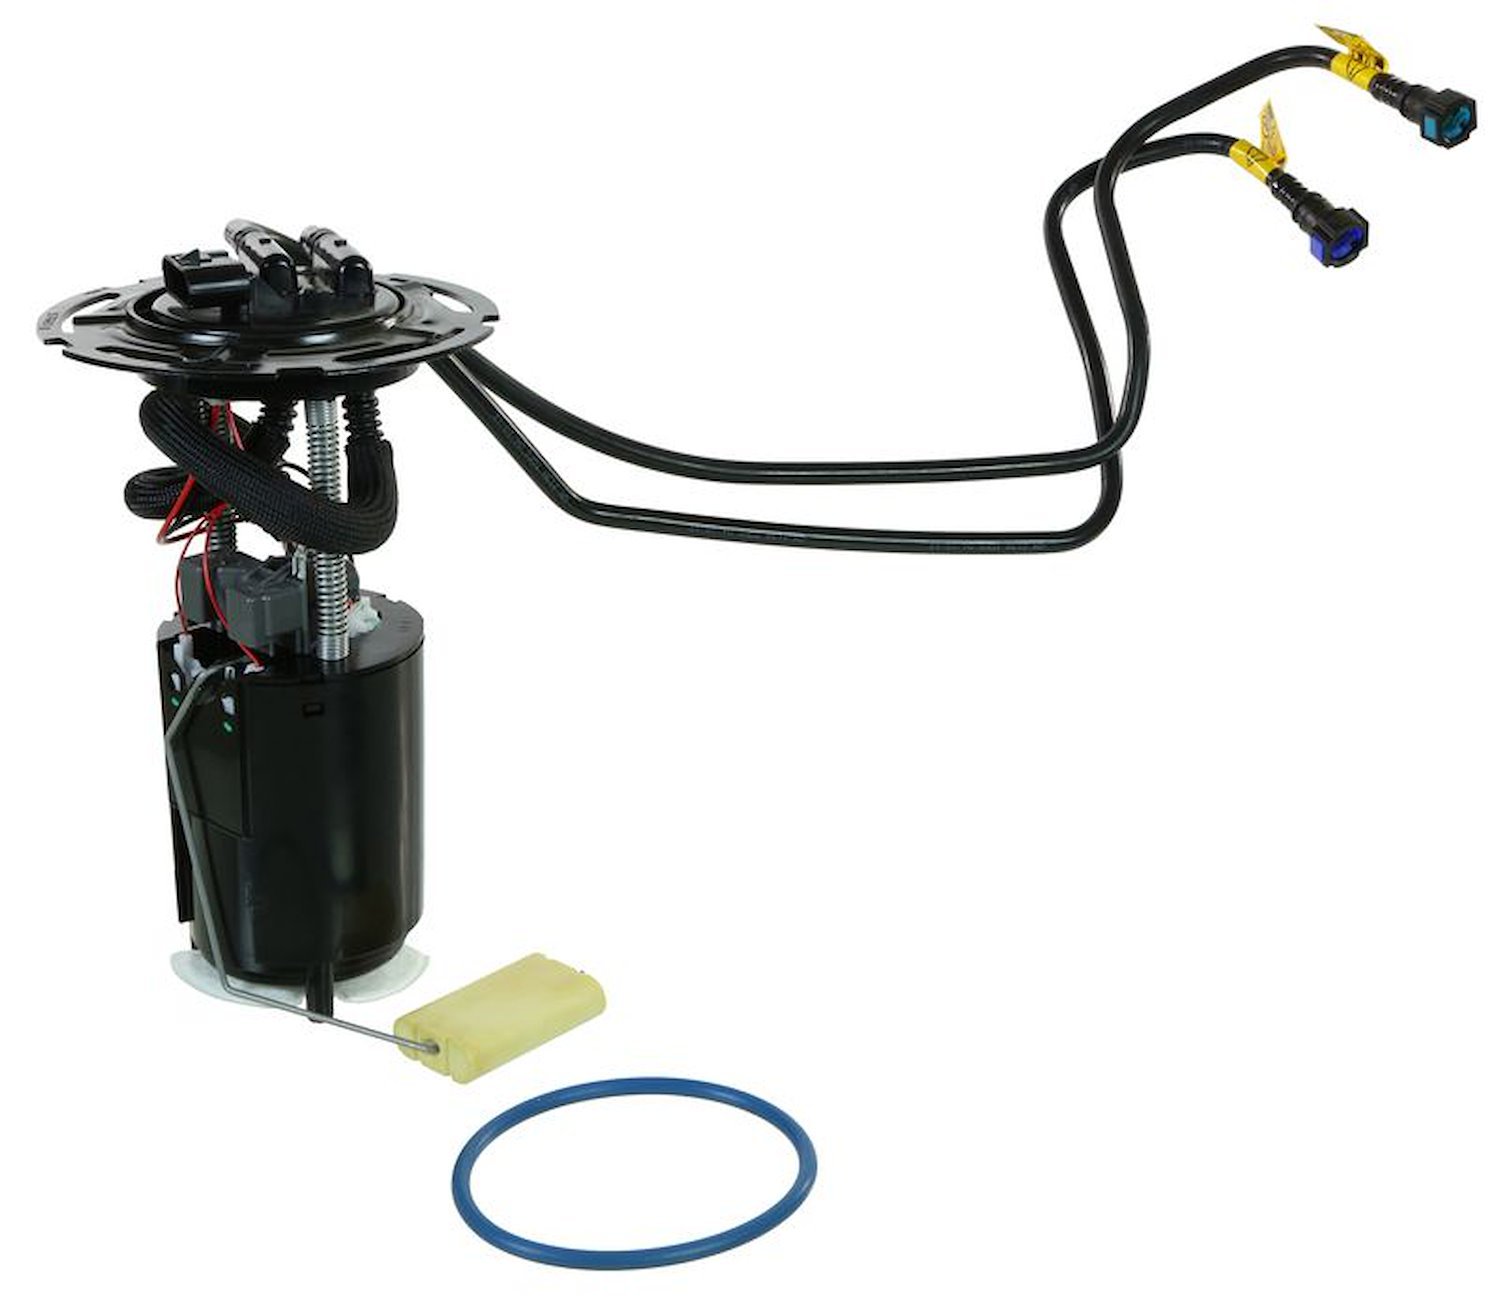 OE GM Replacement Electric Fuel Pump Module Assembly for 2009 Pontiac G5/2009-2010 Chevy Cobalt